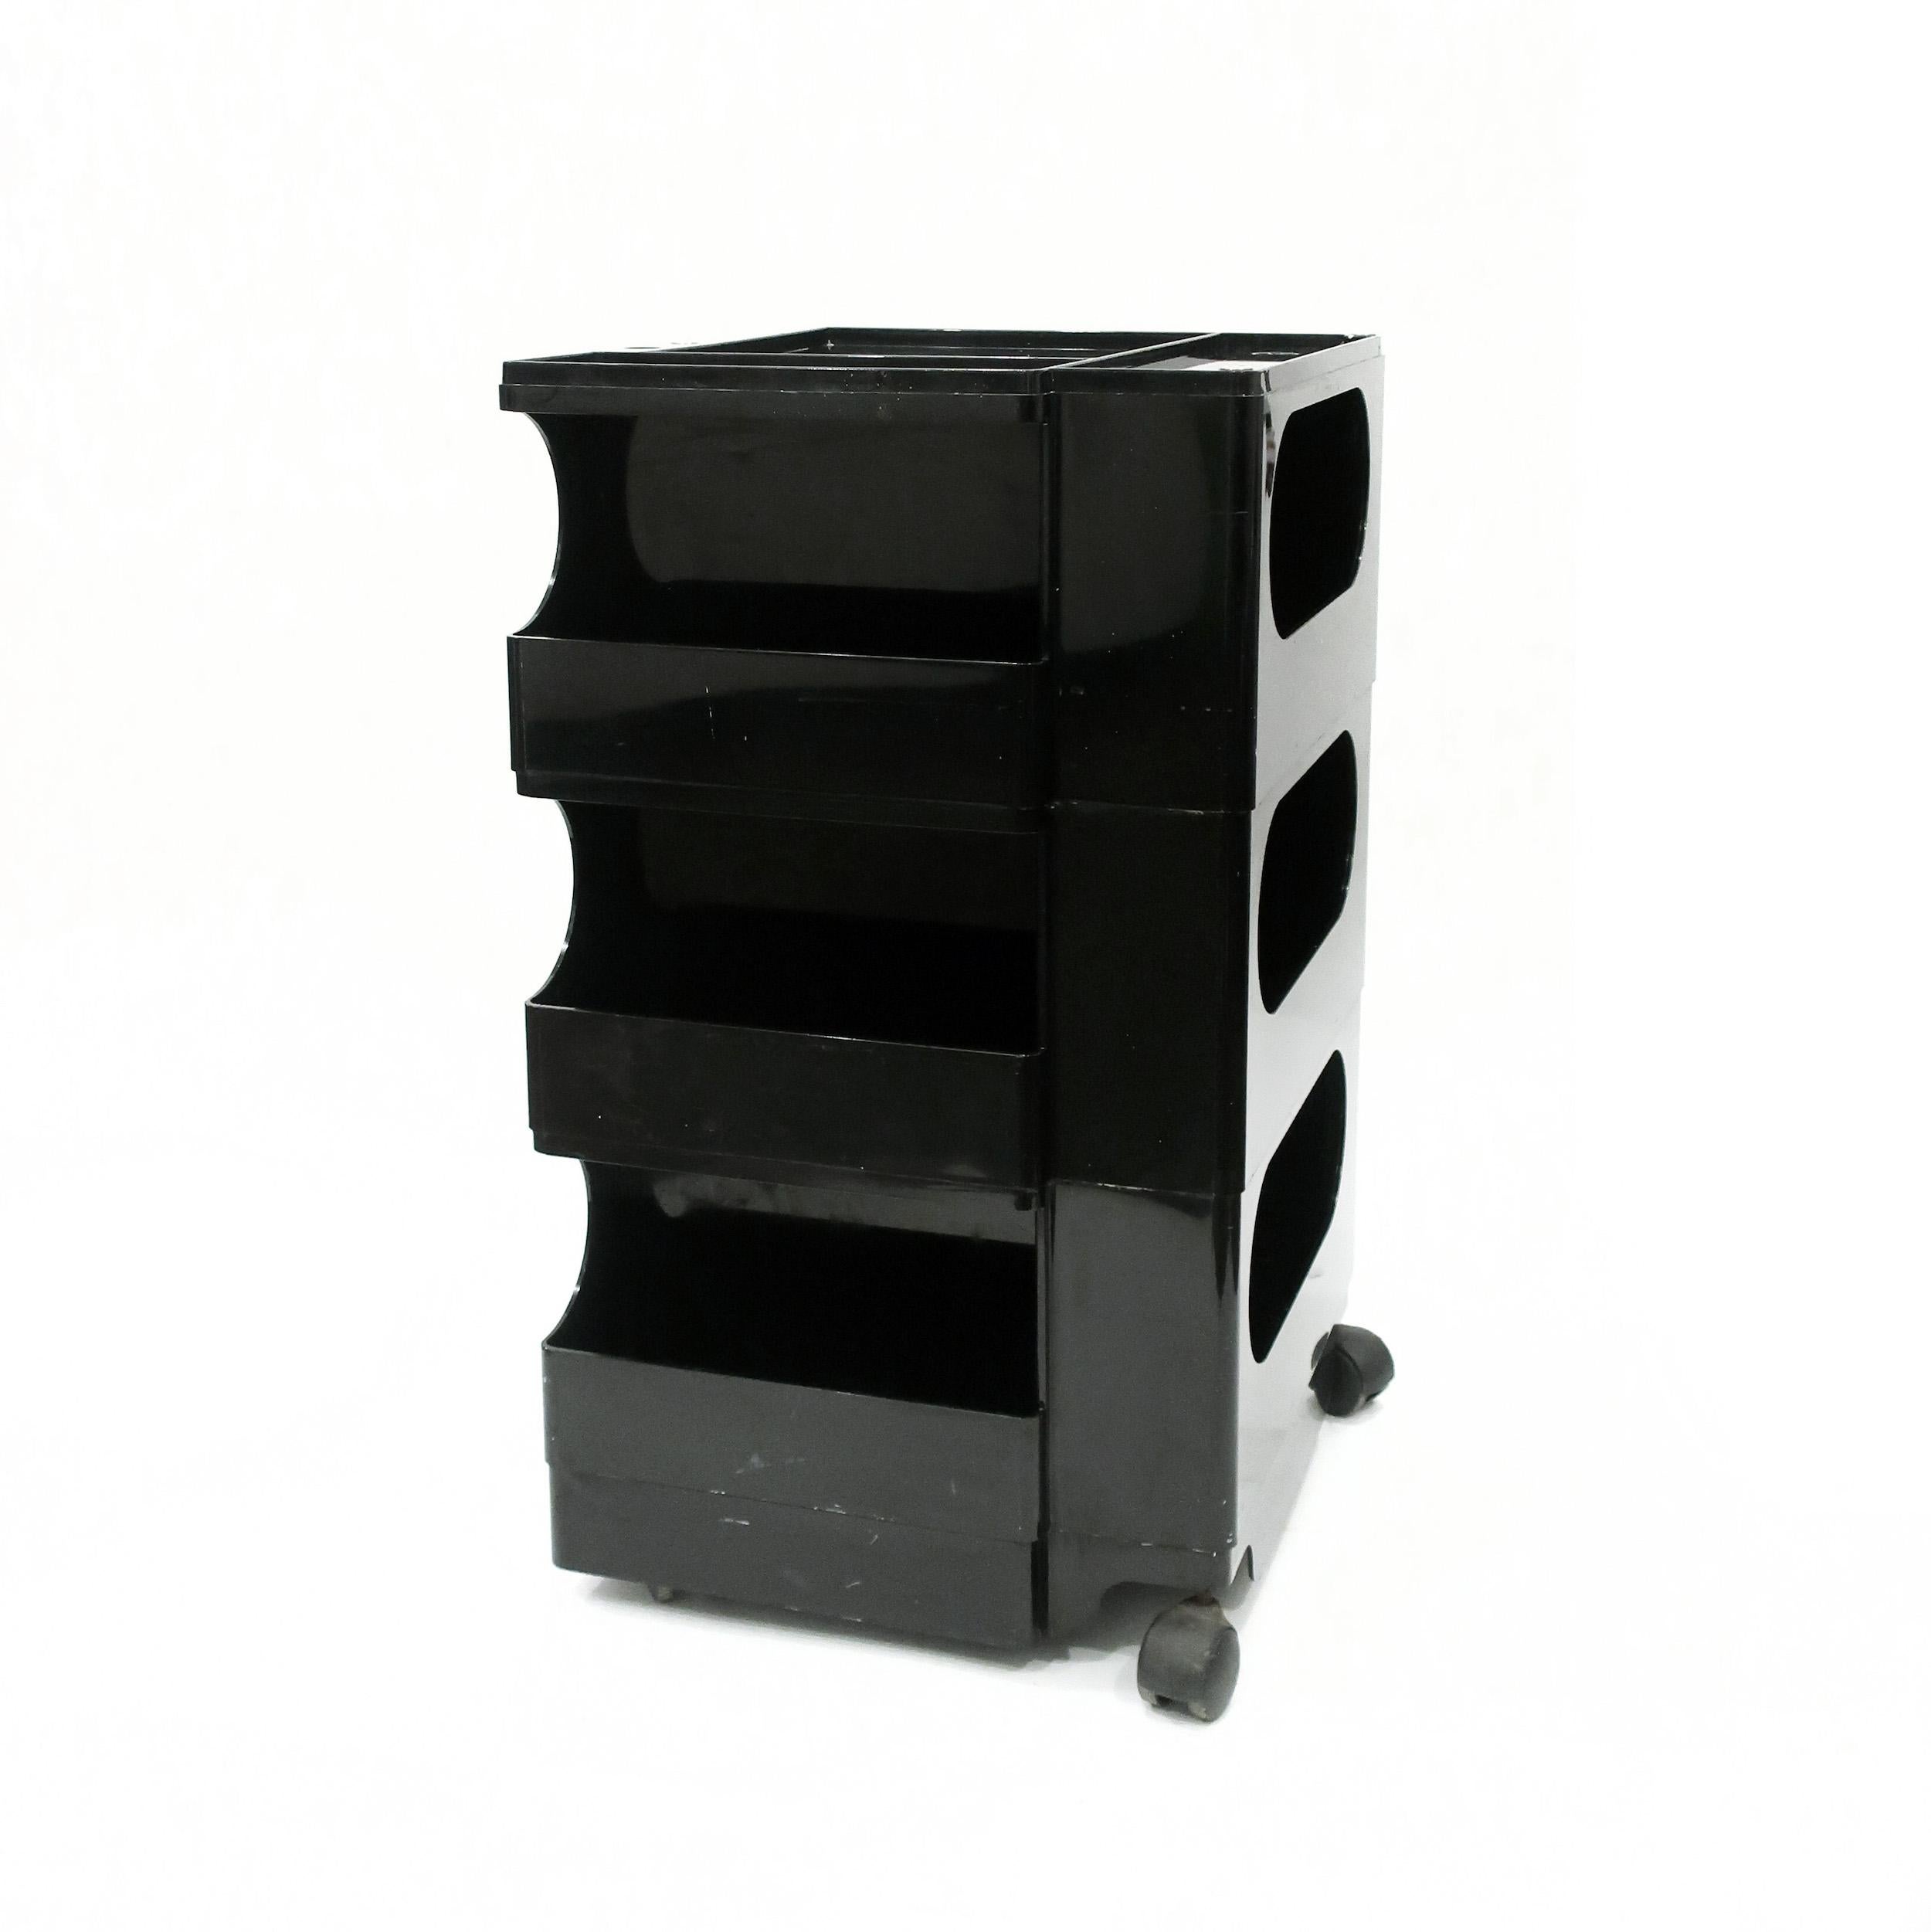 Joe Colombo’s iconic Boby trolley storage unit is at much at home in an artist’s studio as in a home office. First released in 1970 and included in the permanent collection of both the MoMA and the “Triennale” in Milan, this black plastic cart rolls